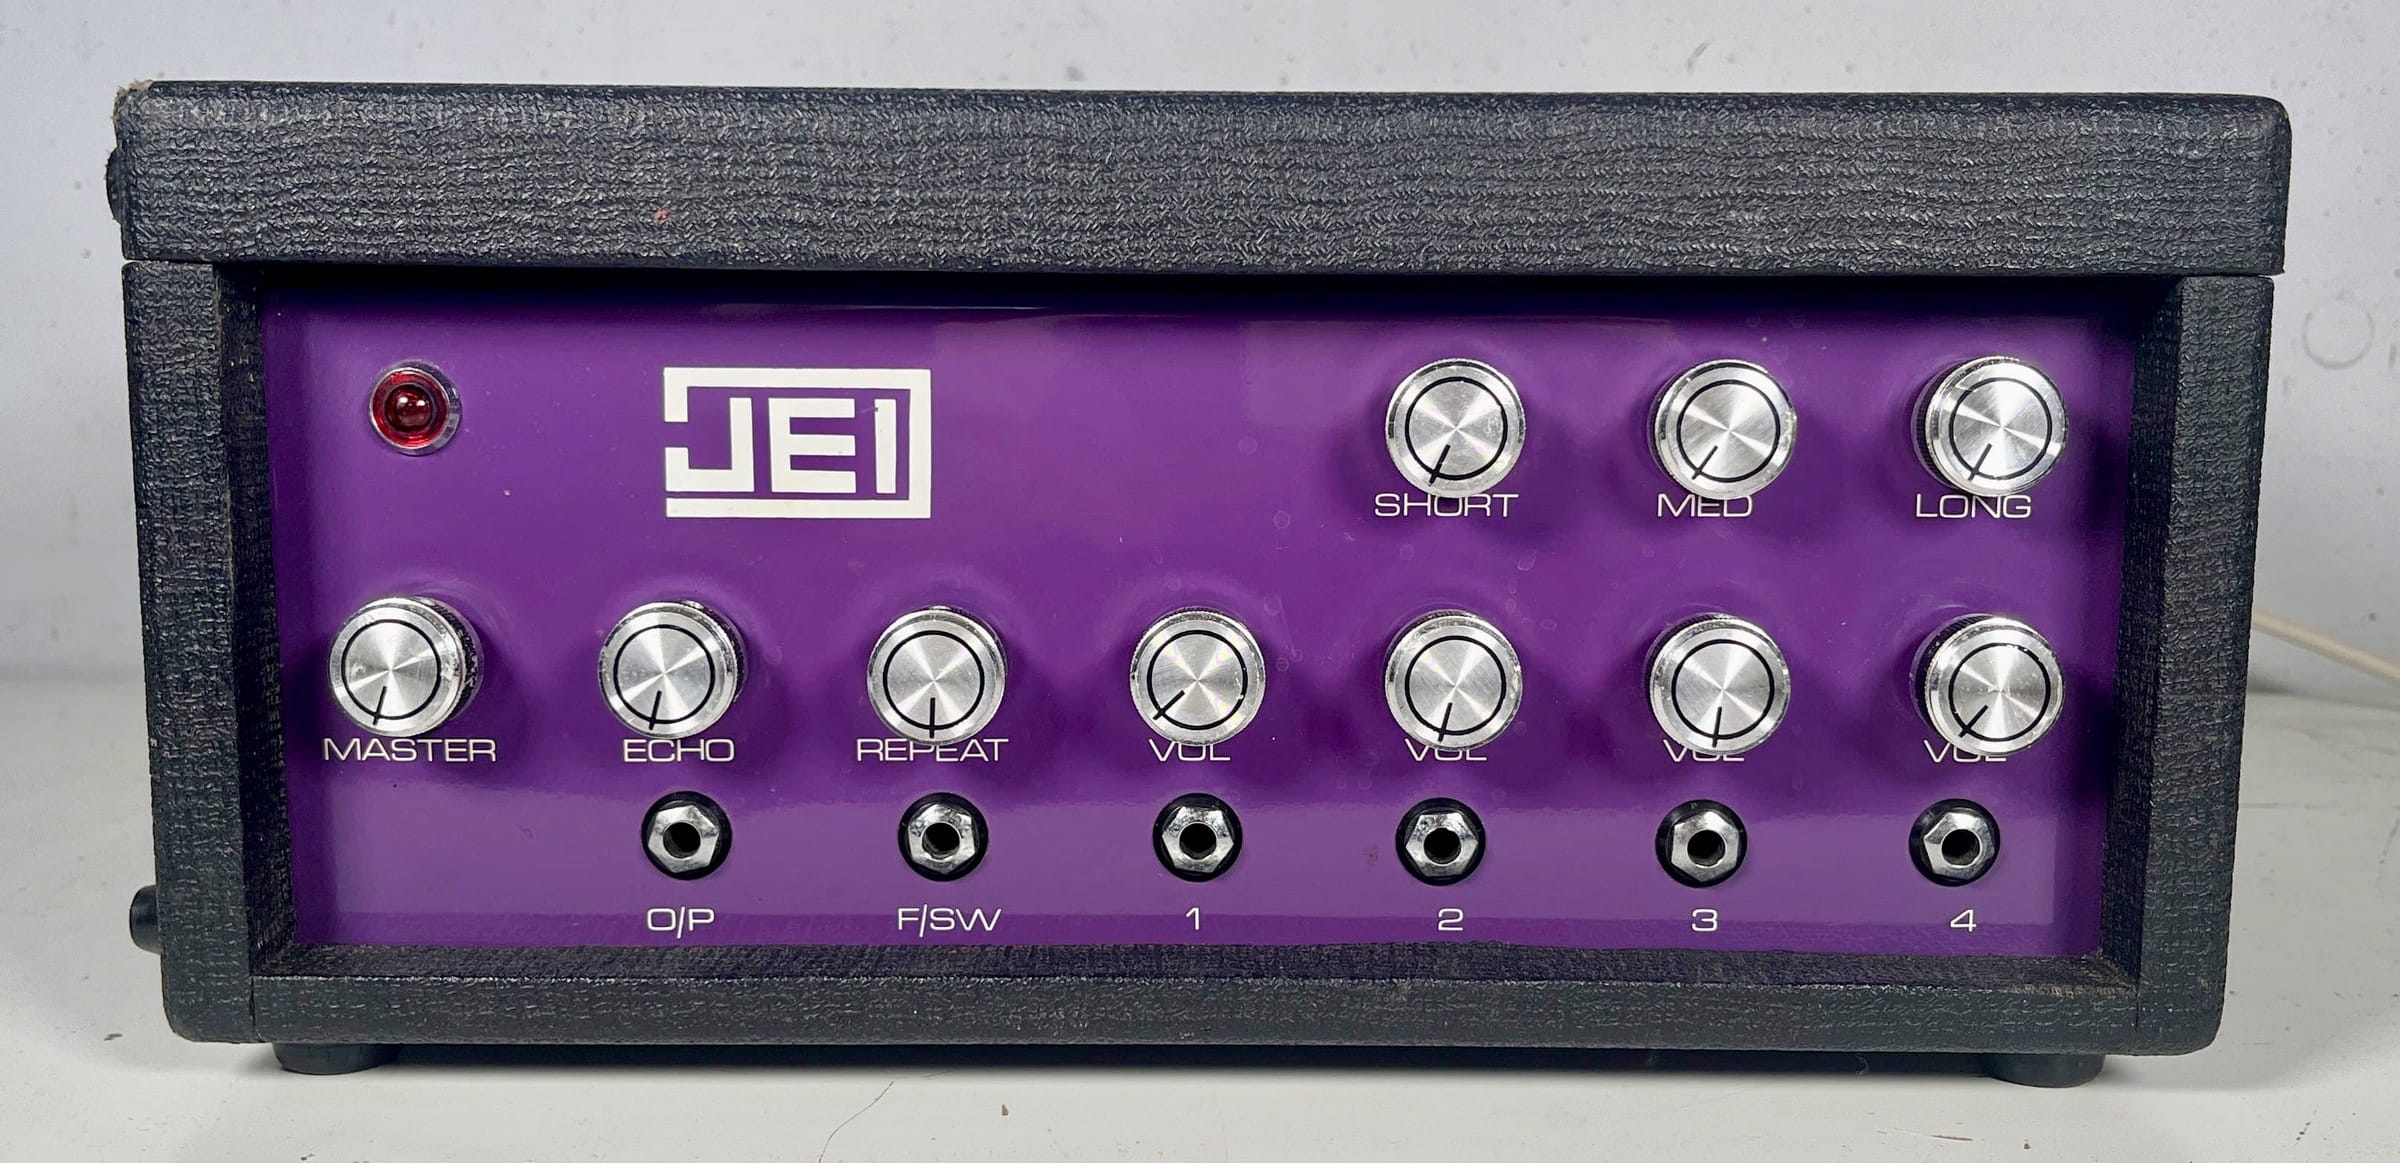 "JEI" Jennings Tape Echo - Very rare tape echo produced by Jennings Electronic Industries in the - Image 4 of 7